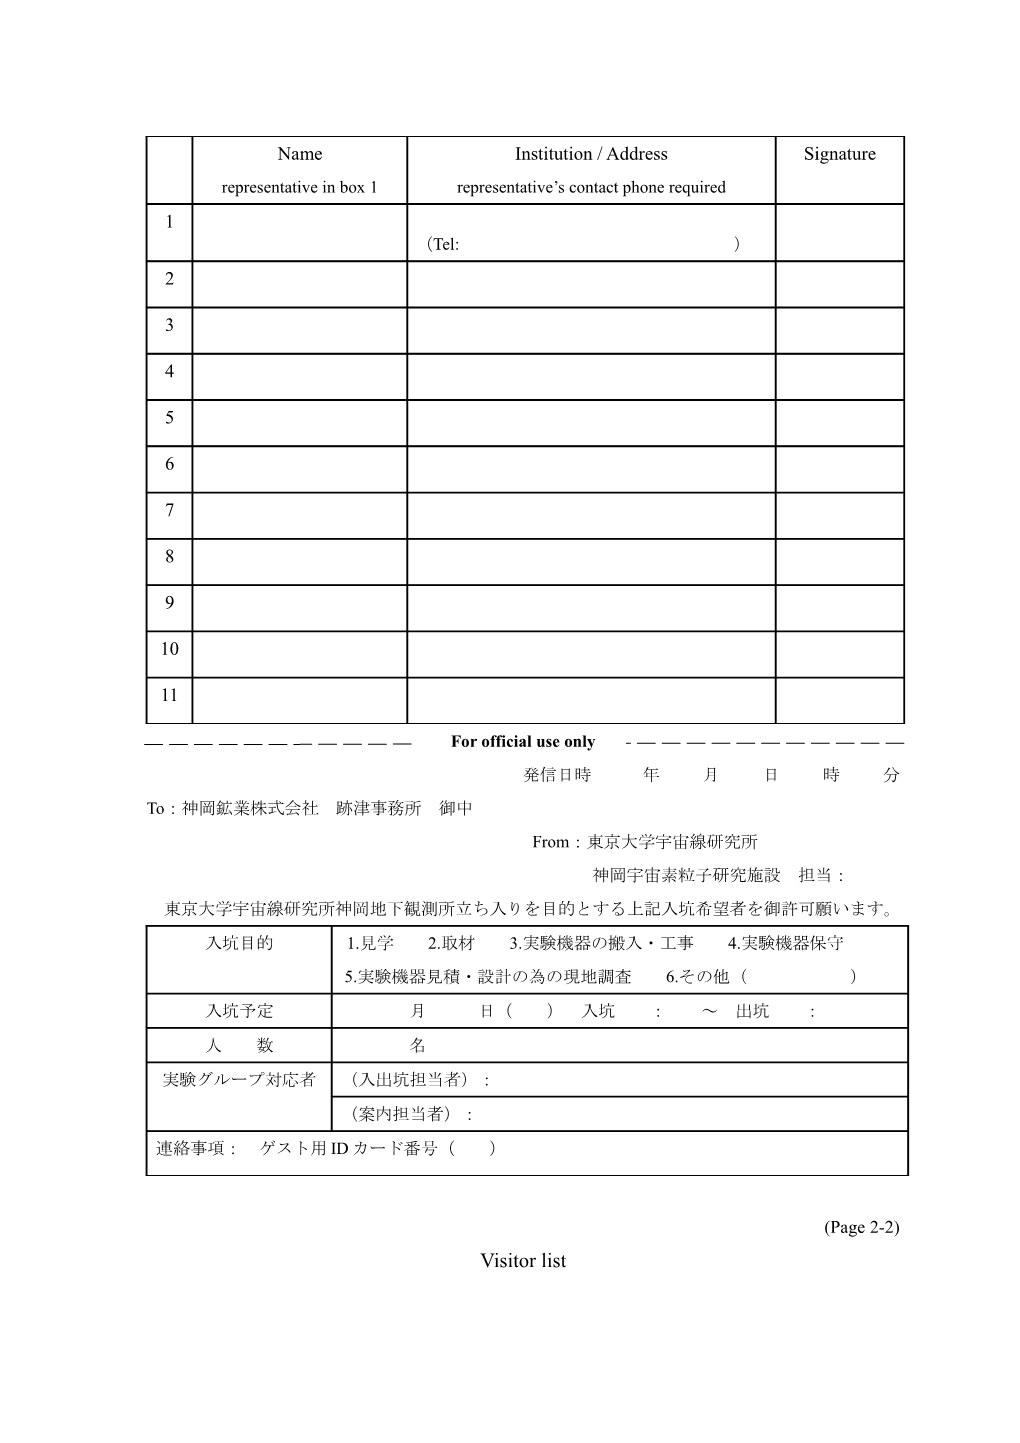 Application for Visitors to Kamioka Observatory